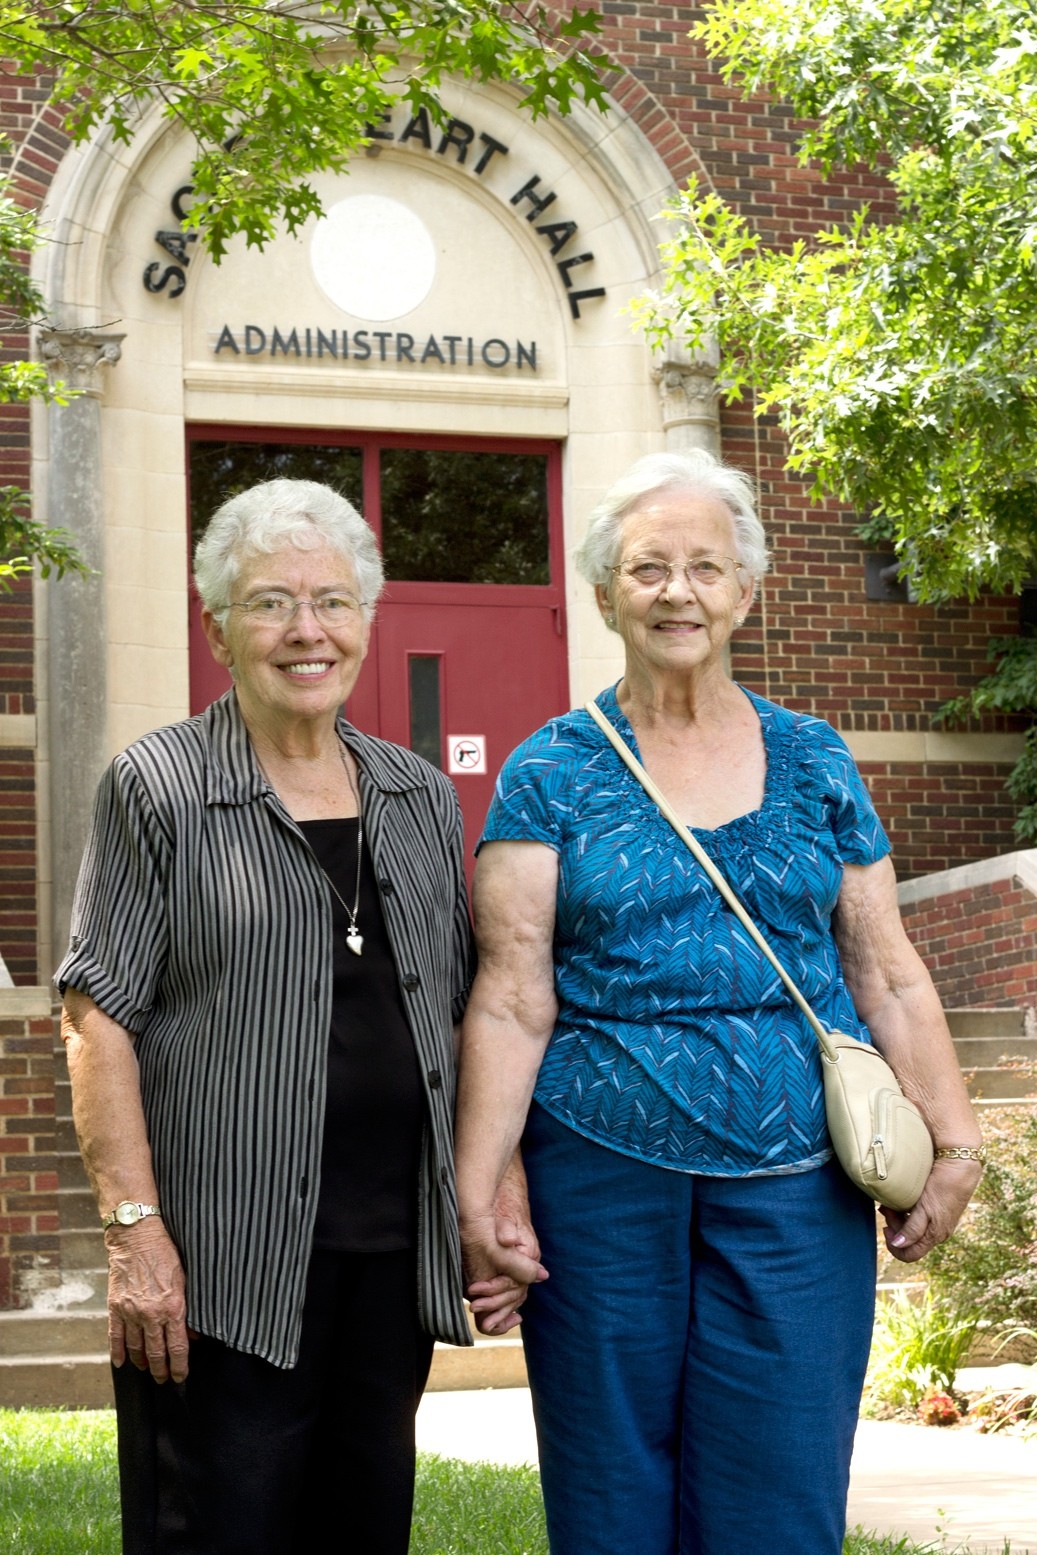 Sacred Heart College 1954 graduates Tarcisia Roths, ASC and Colene (Deusing) Kruse reminisced about their days as students during Kruse's Aug. 5 visit.